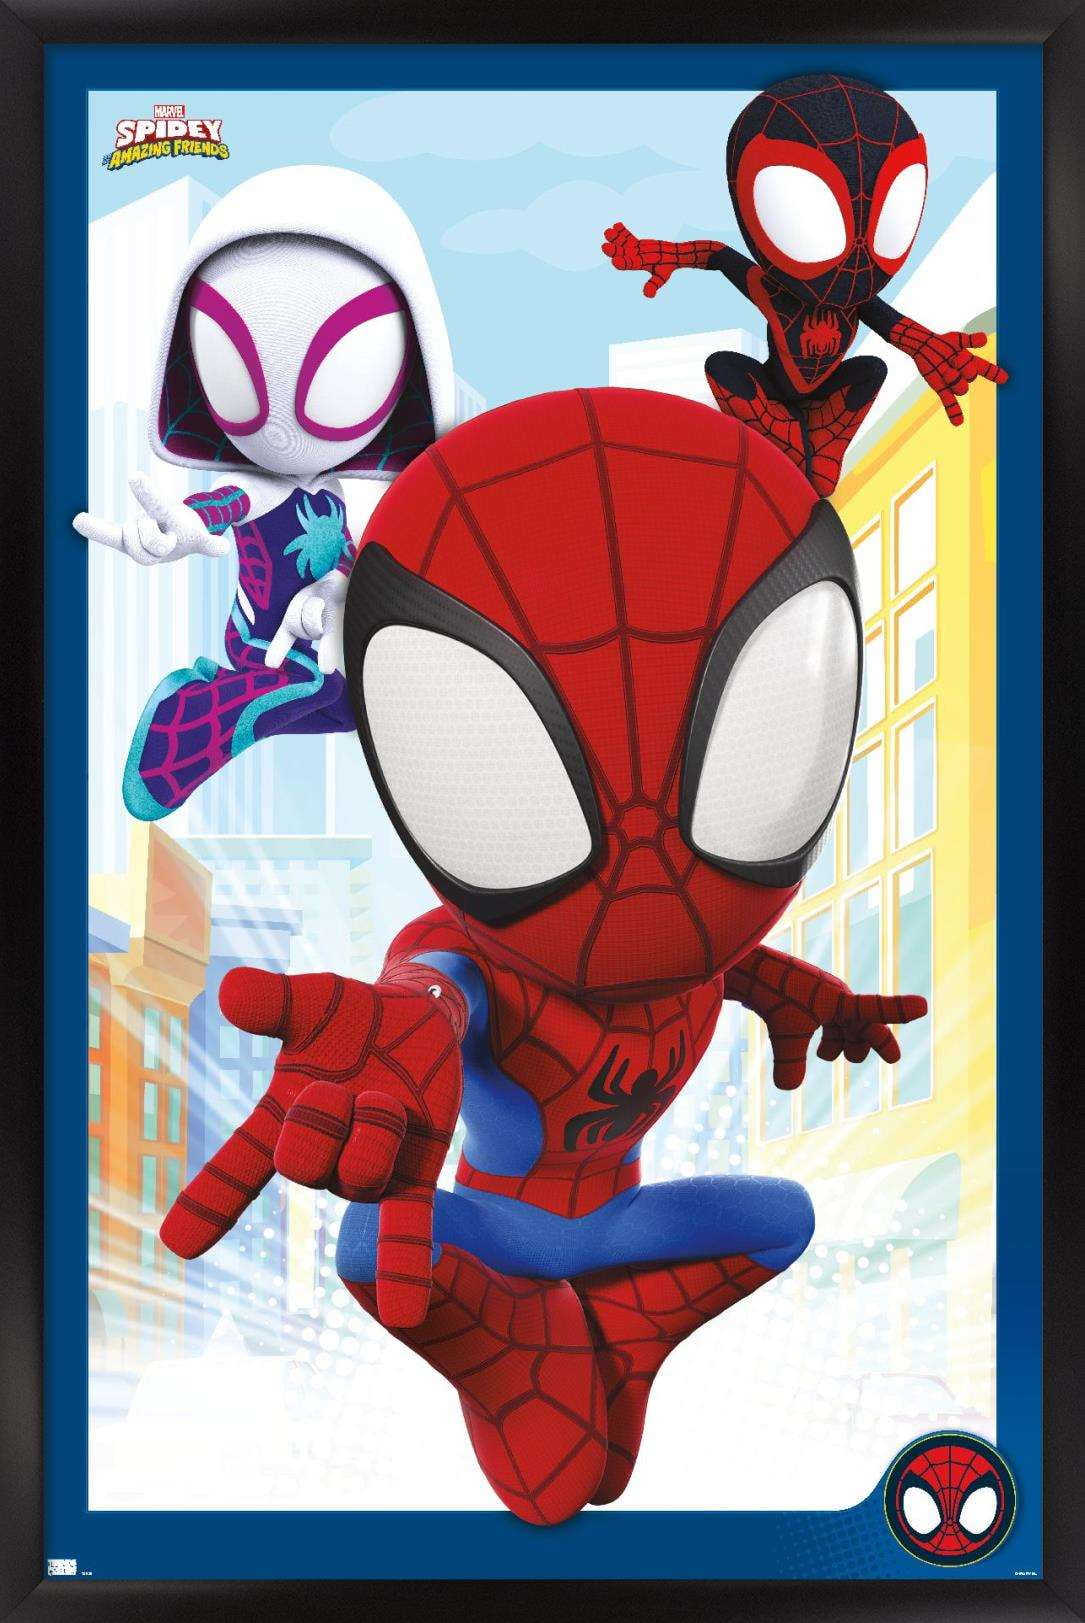 Marvel Spidey And His Amazing Friends - Group Wall Poster, 14.725 x  22.375 